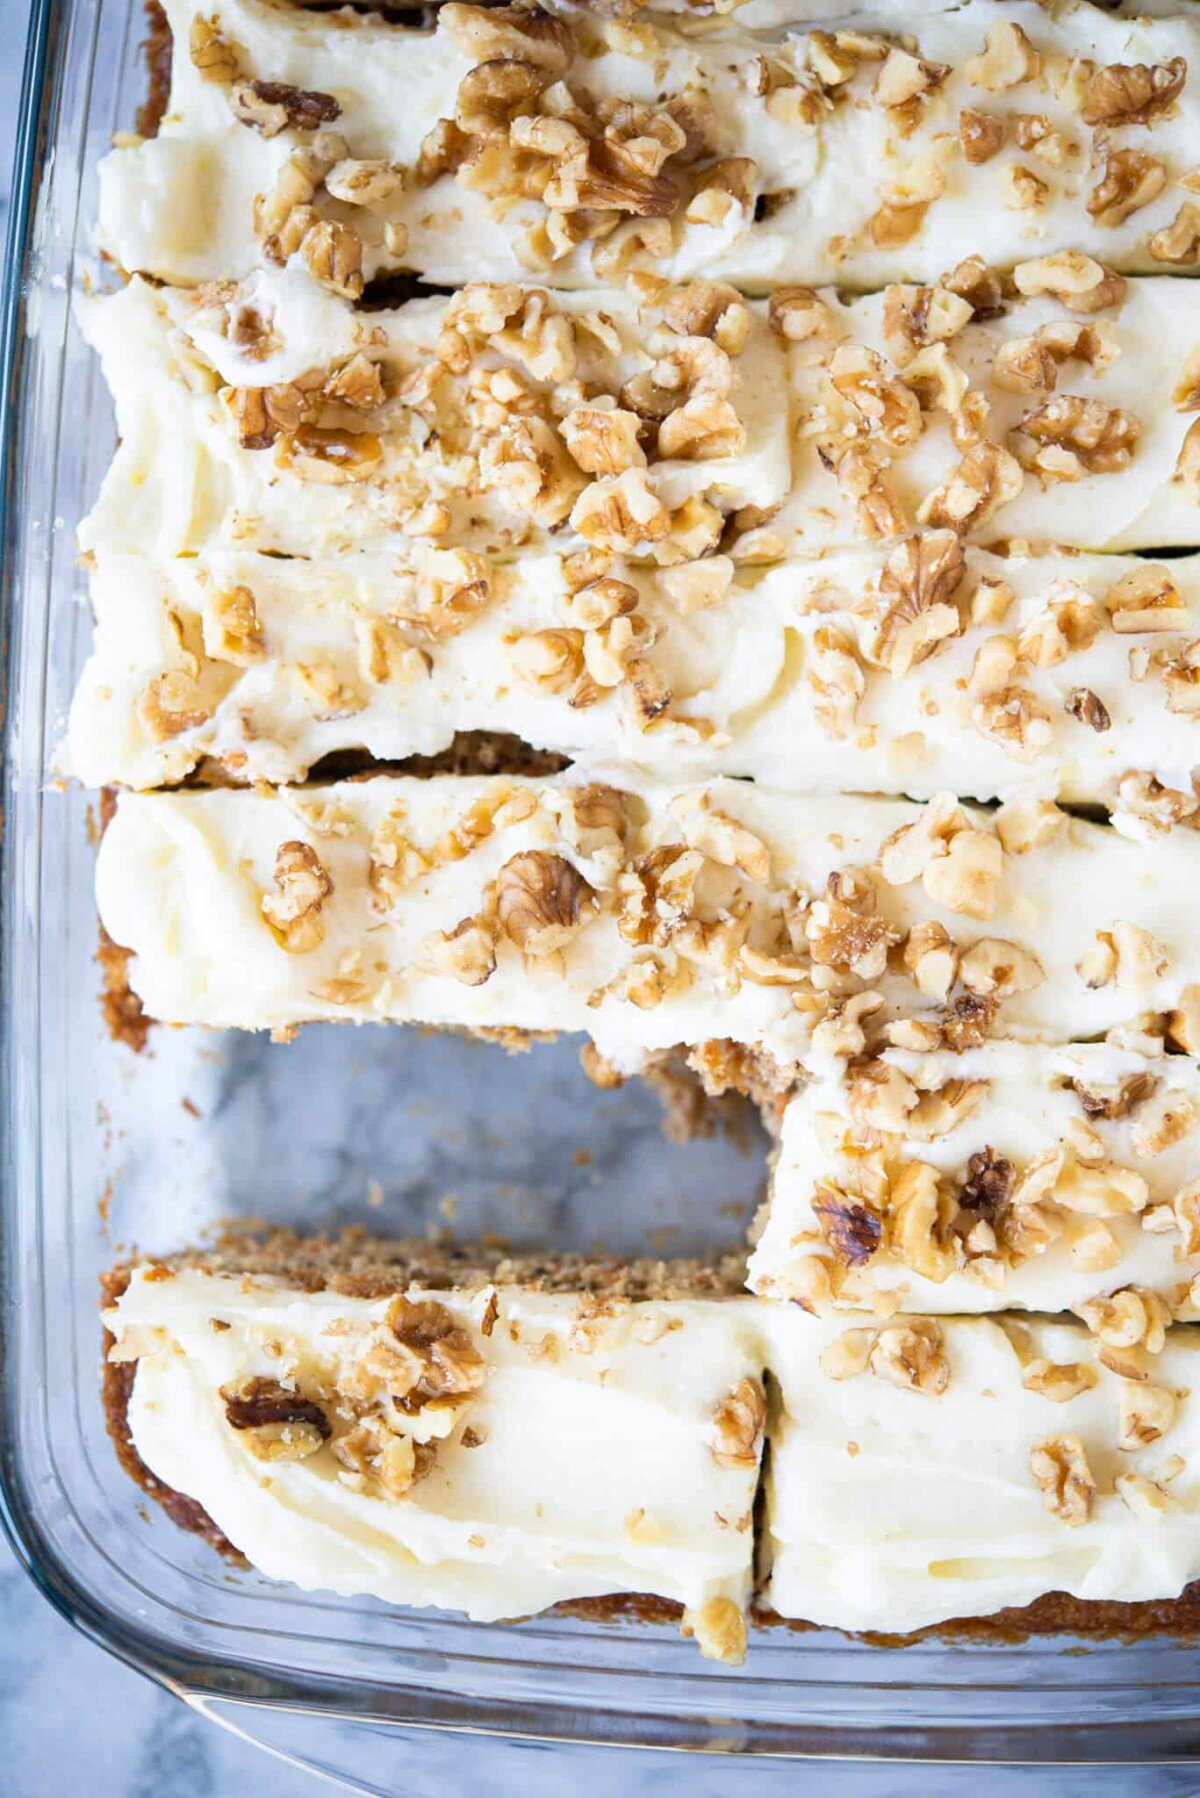 iced carrot cake bars cut into pieces with one piece missing in a clear baking dish on a marble surface